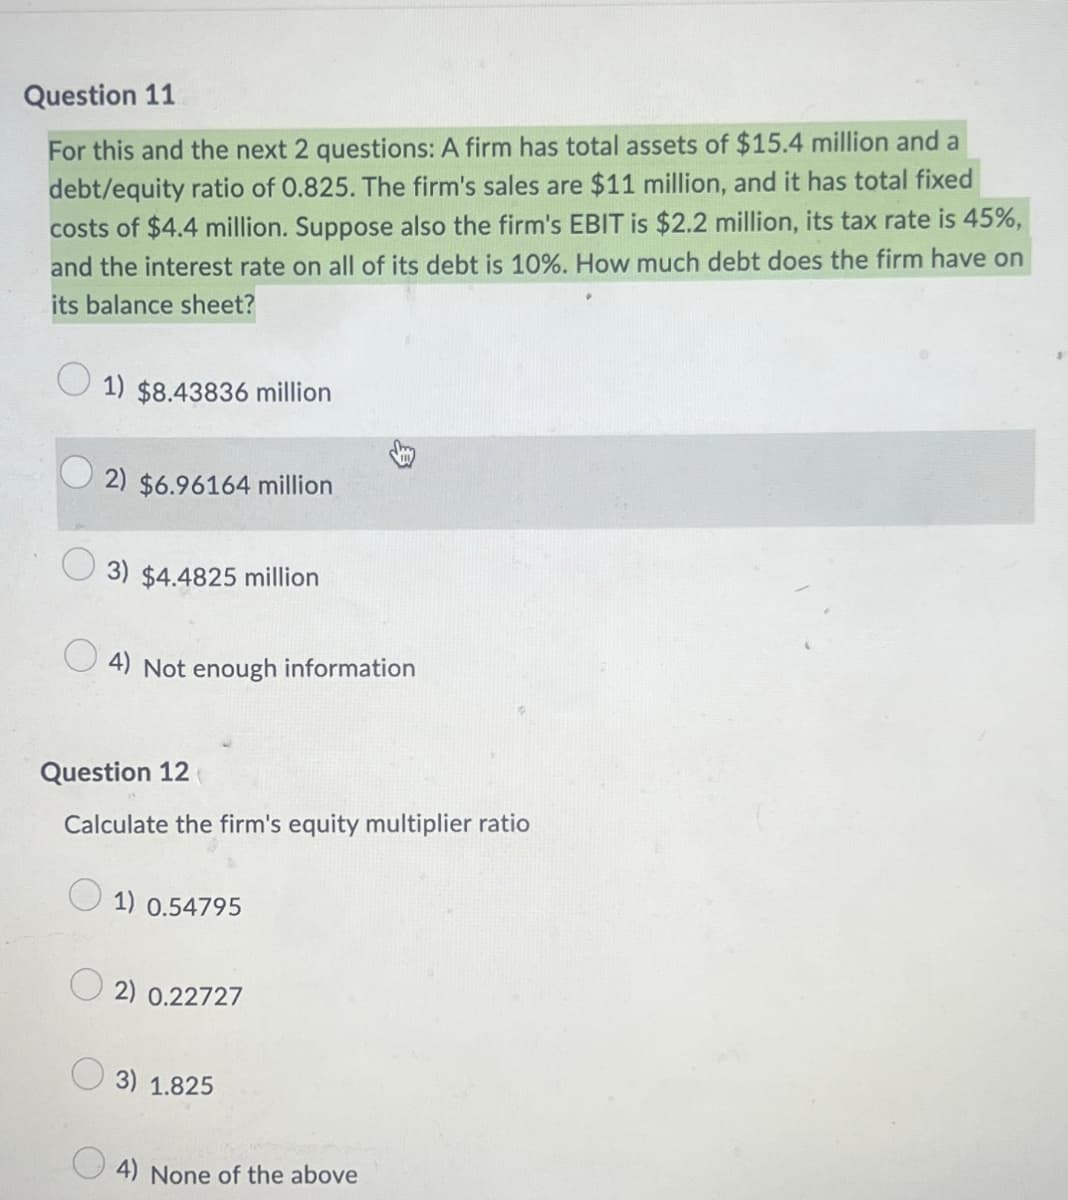 Question 11
For this and the next 2 questions: A firm has total assets of $15.4 million and a
debt/equity ratio of 0.825. The firm's sales are $11 million, and it has total fixed
costs of $4.4 million. Suppose also the firm's EBIT is $2.2 million, its tax rate is 45%,
and the interest rate on all of its debt is 10%. How much debt does the firm have on
its balance sheet?
1) $8.43836 million
2) $6.96164 million
3) $4.4825 million
4) Not enough information
Question 12
Calculate the firm's equity multiplier ratio
1) 0.54795
2) 0.22727
3) 1.825
4) None of the above